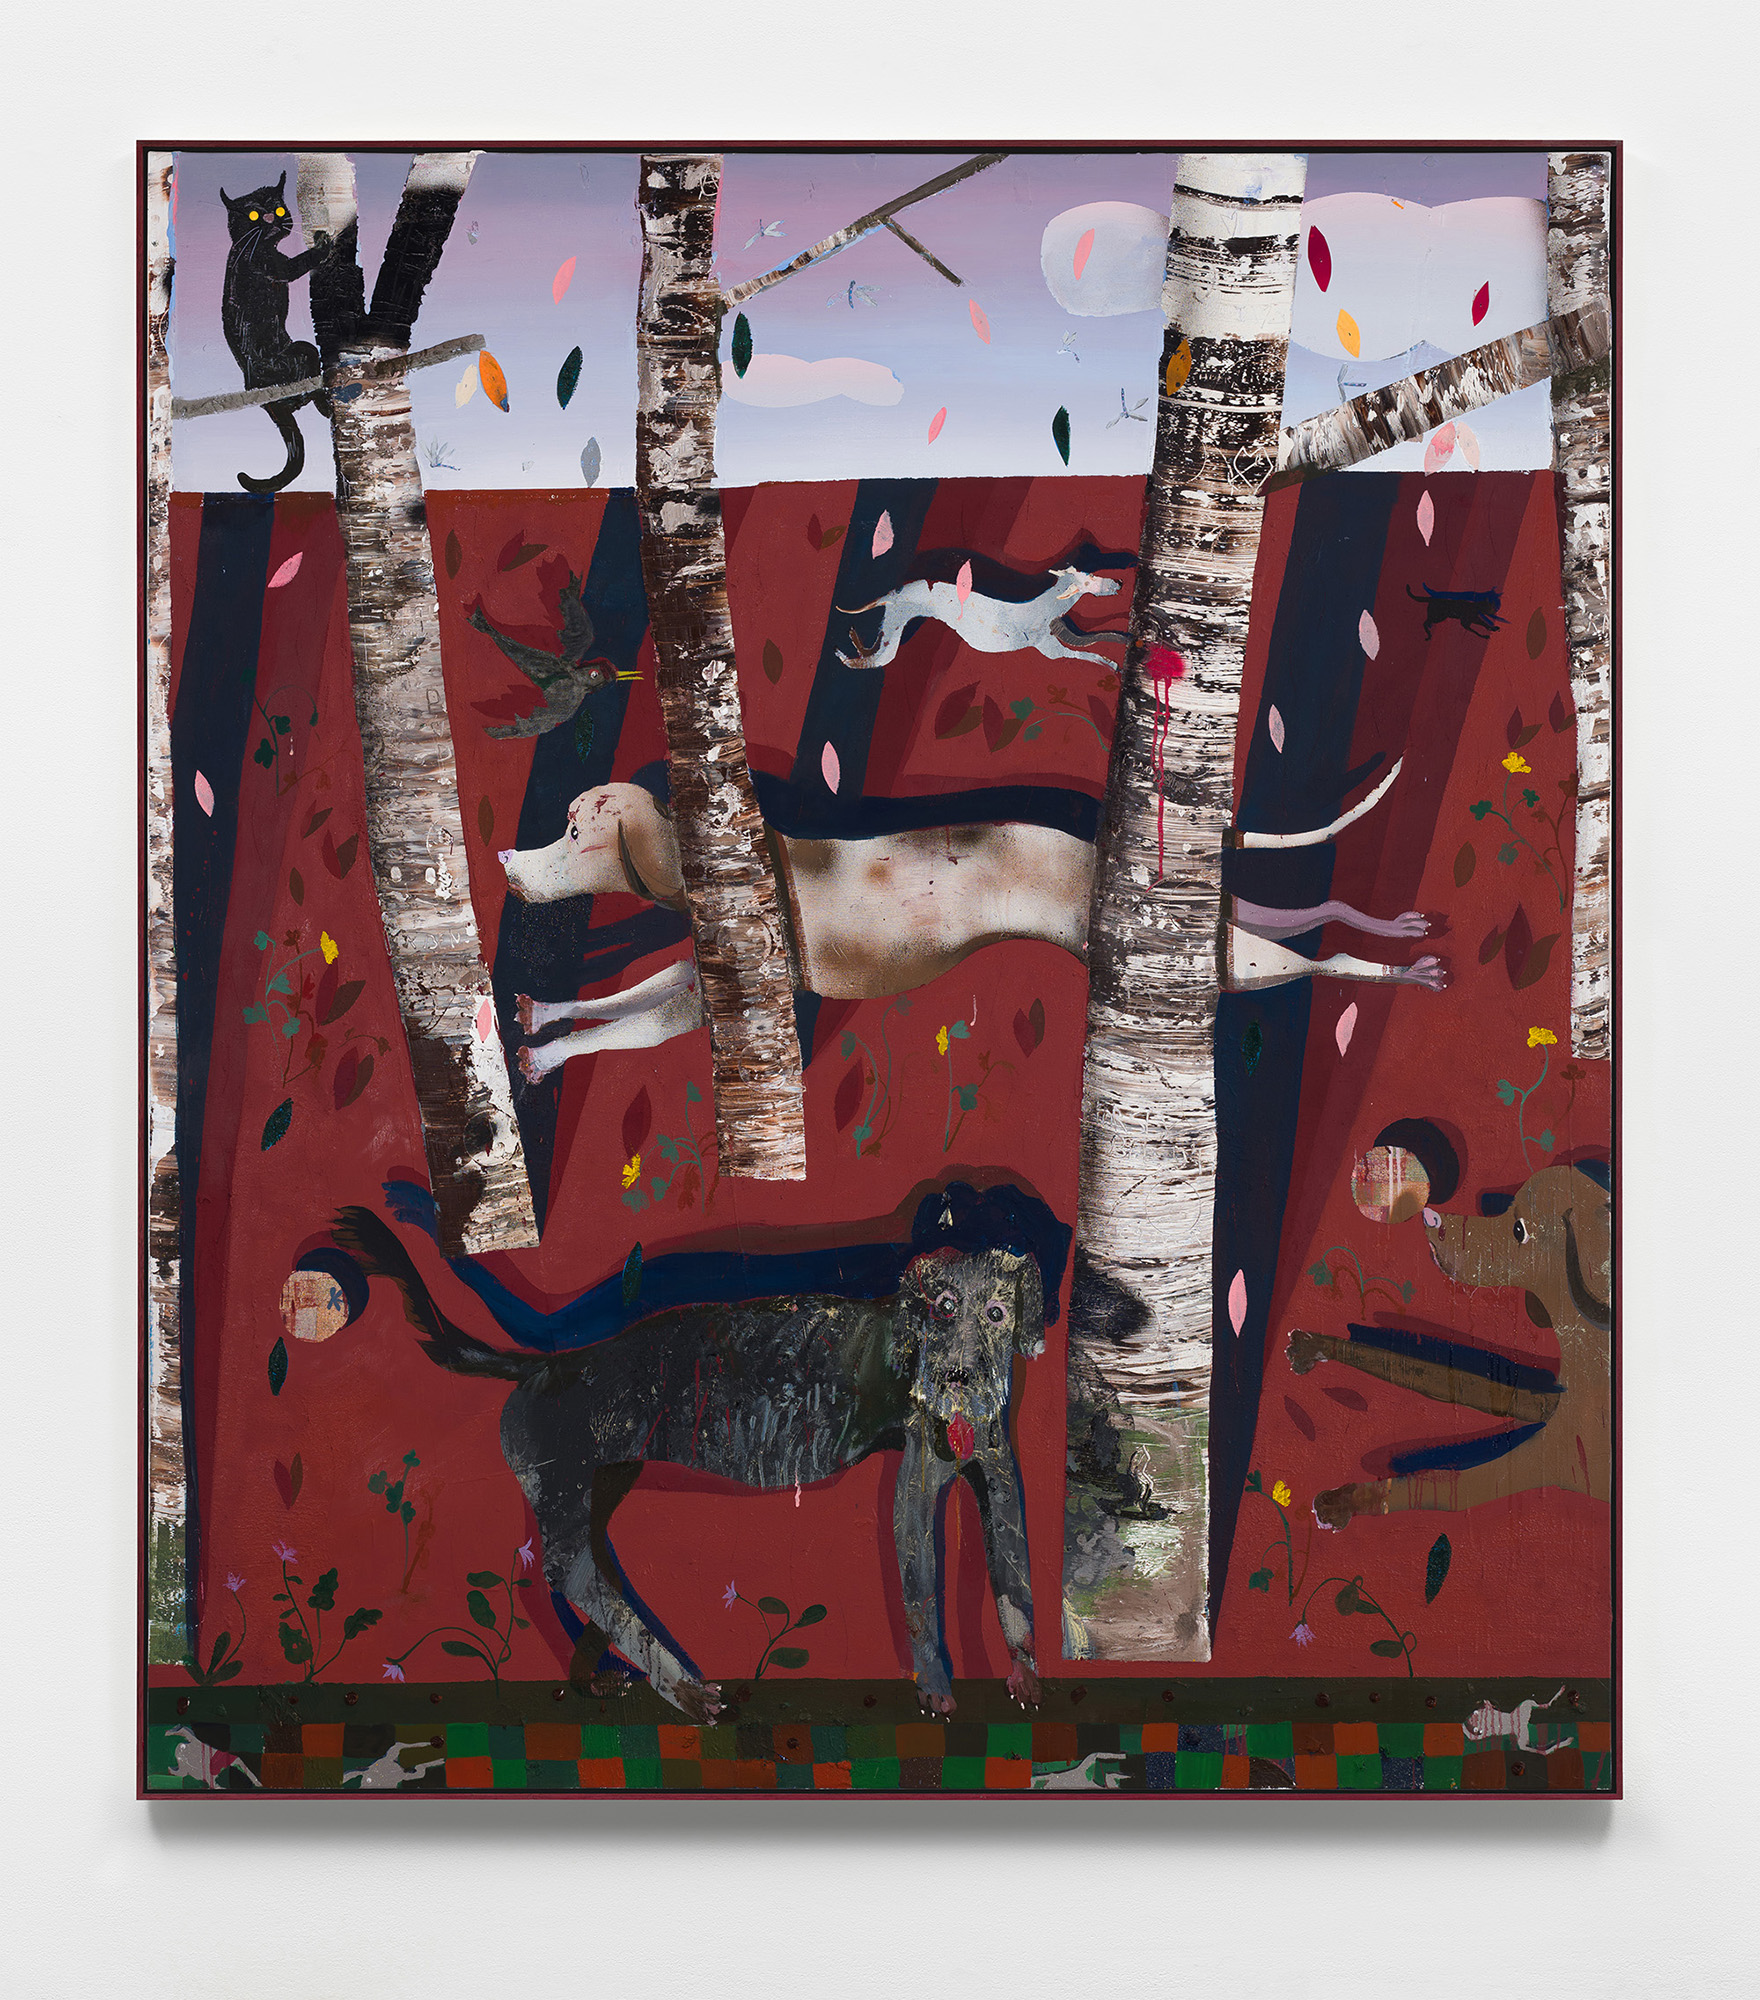 Pieter Jennes, Barking up the wrong tree, 2023, oil and collage on canvas, 190 x 170 cm, 74 3/4 x 66 7/8 in.